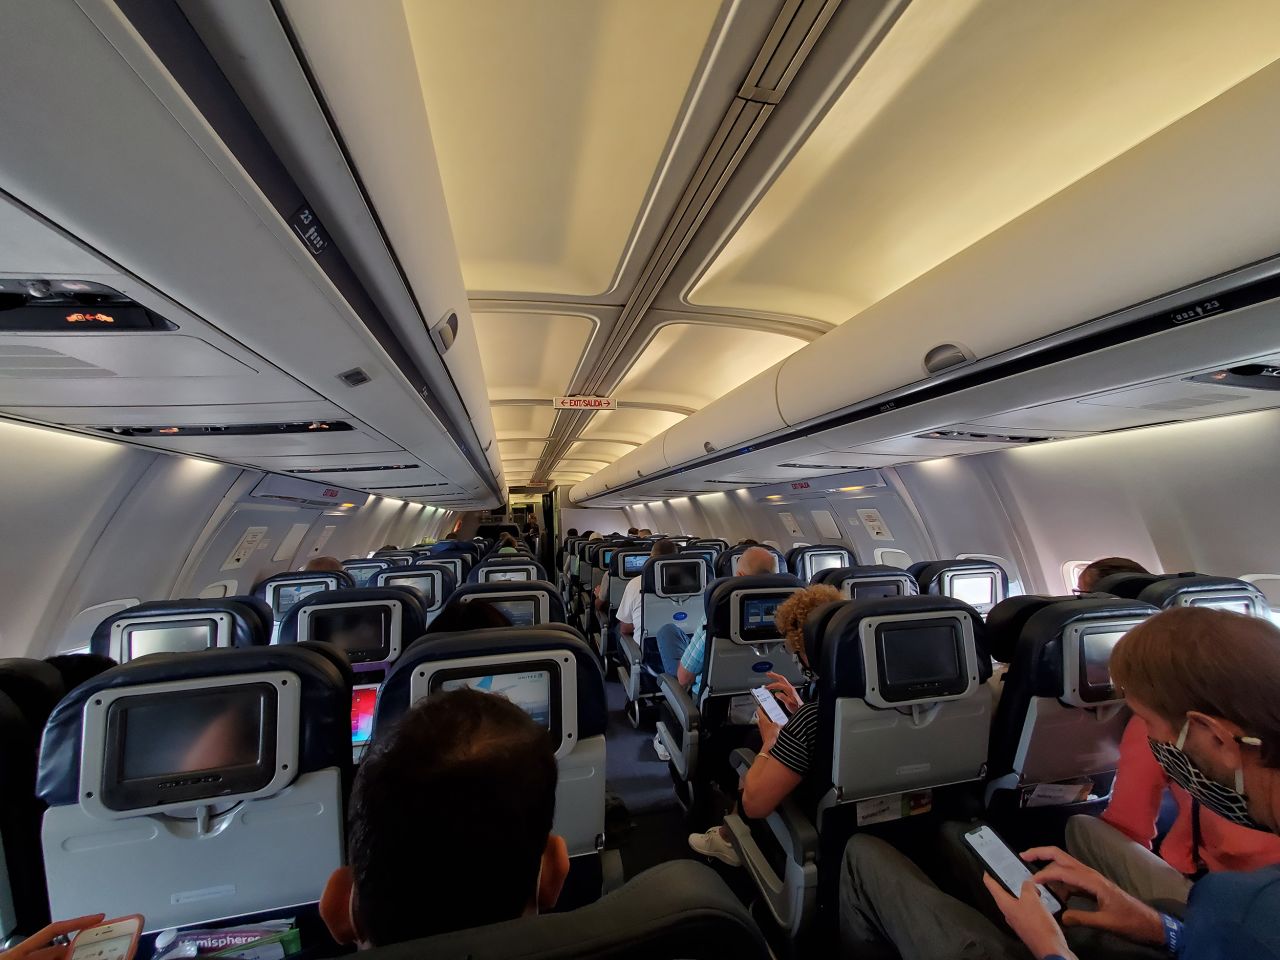 Passengers aboard a United Airlines airplane during a flight in July 2021 